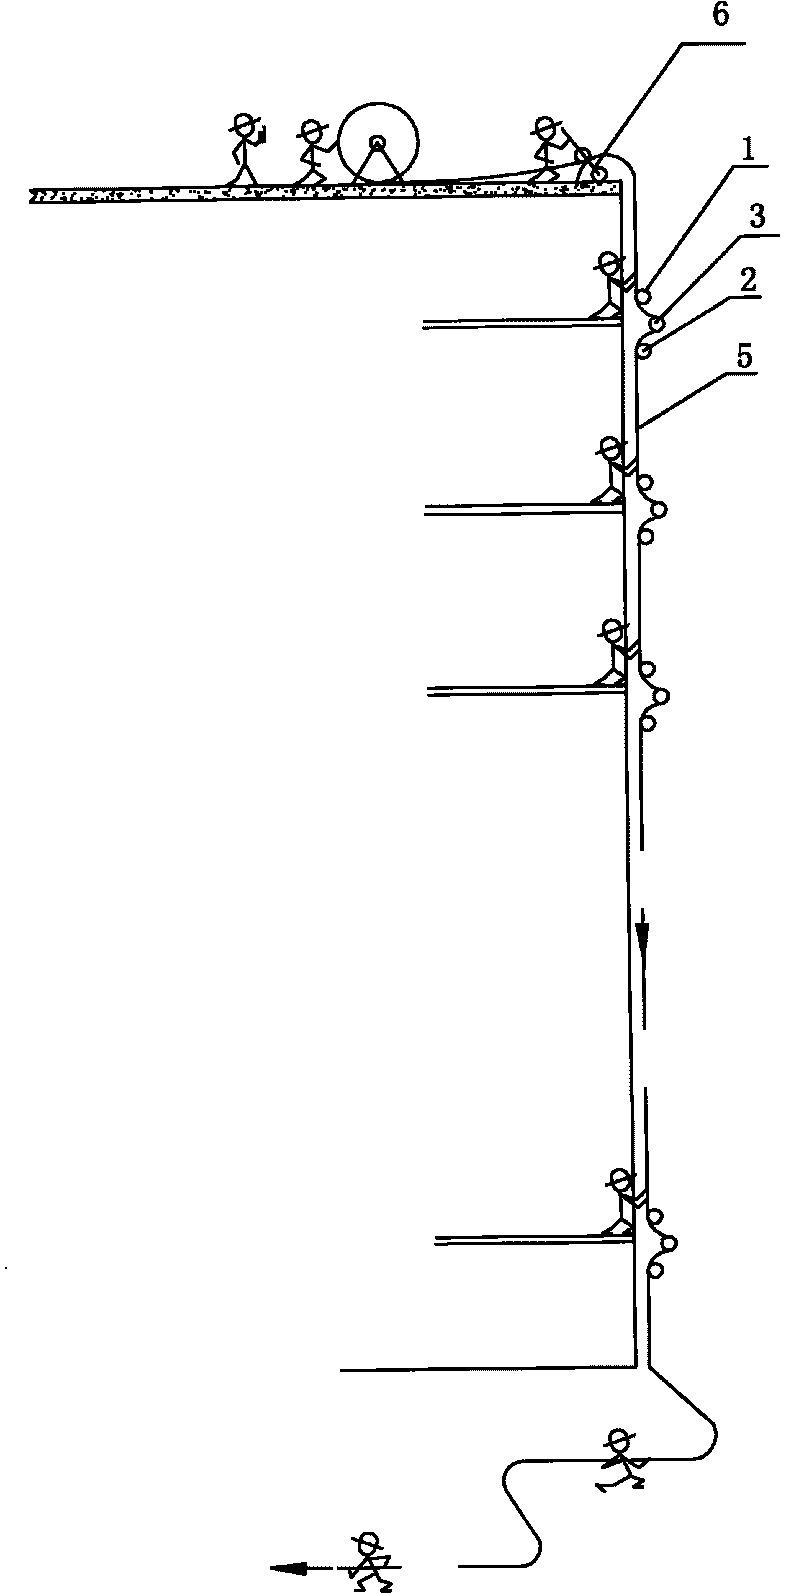 Method for laying vertical cables for extra-high building